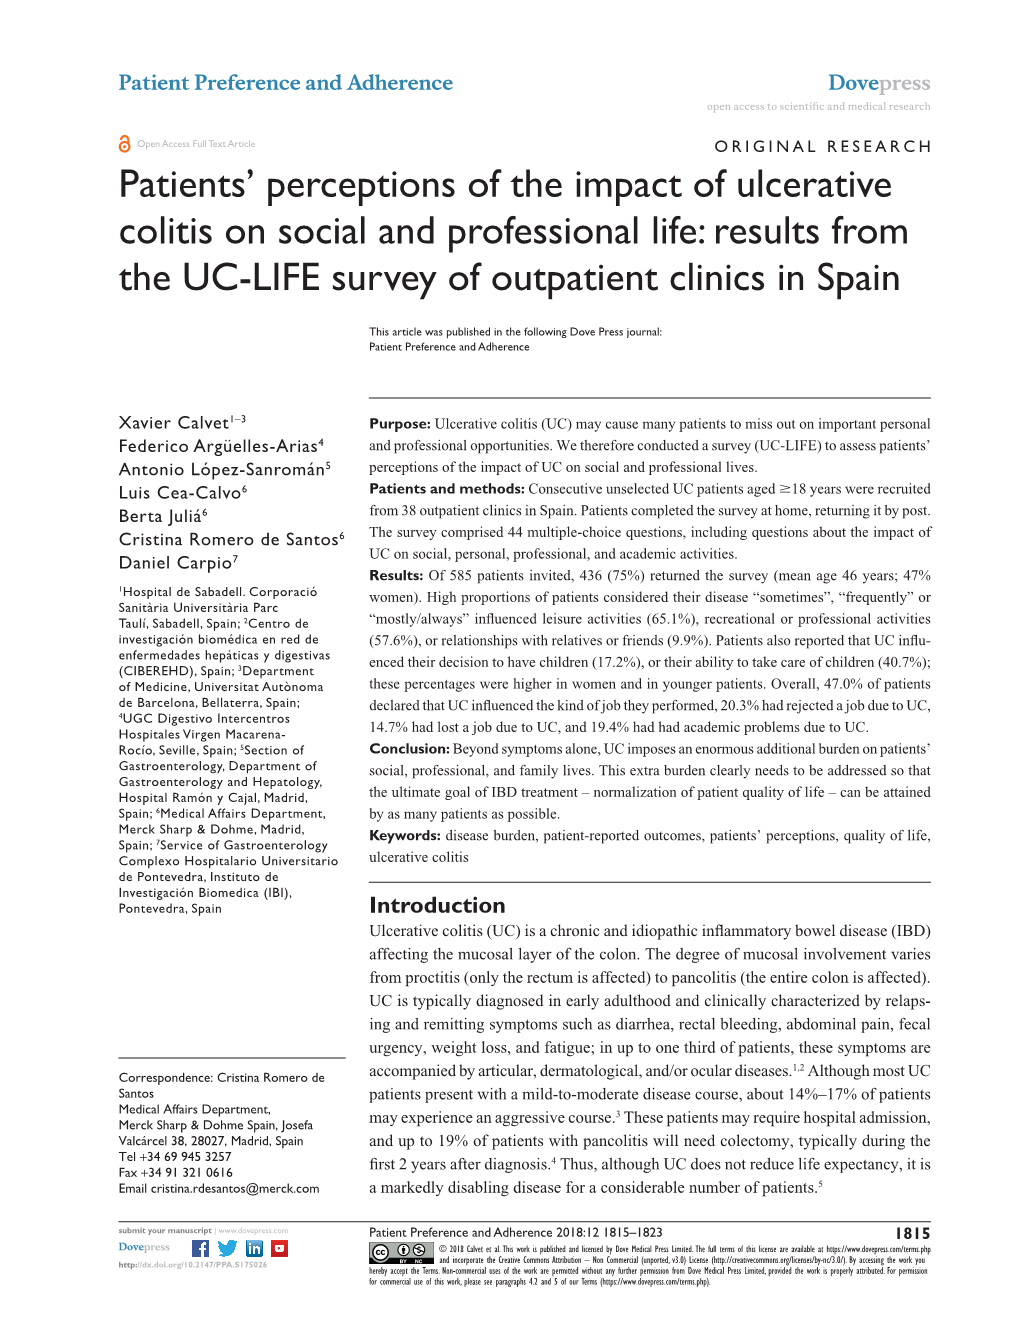 Patients' Perceptions of the Impact of Ulcerative Colitis On